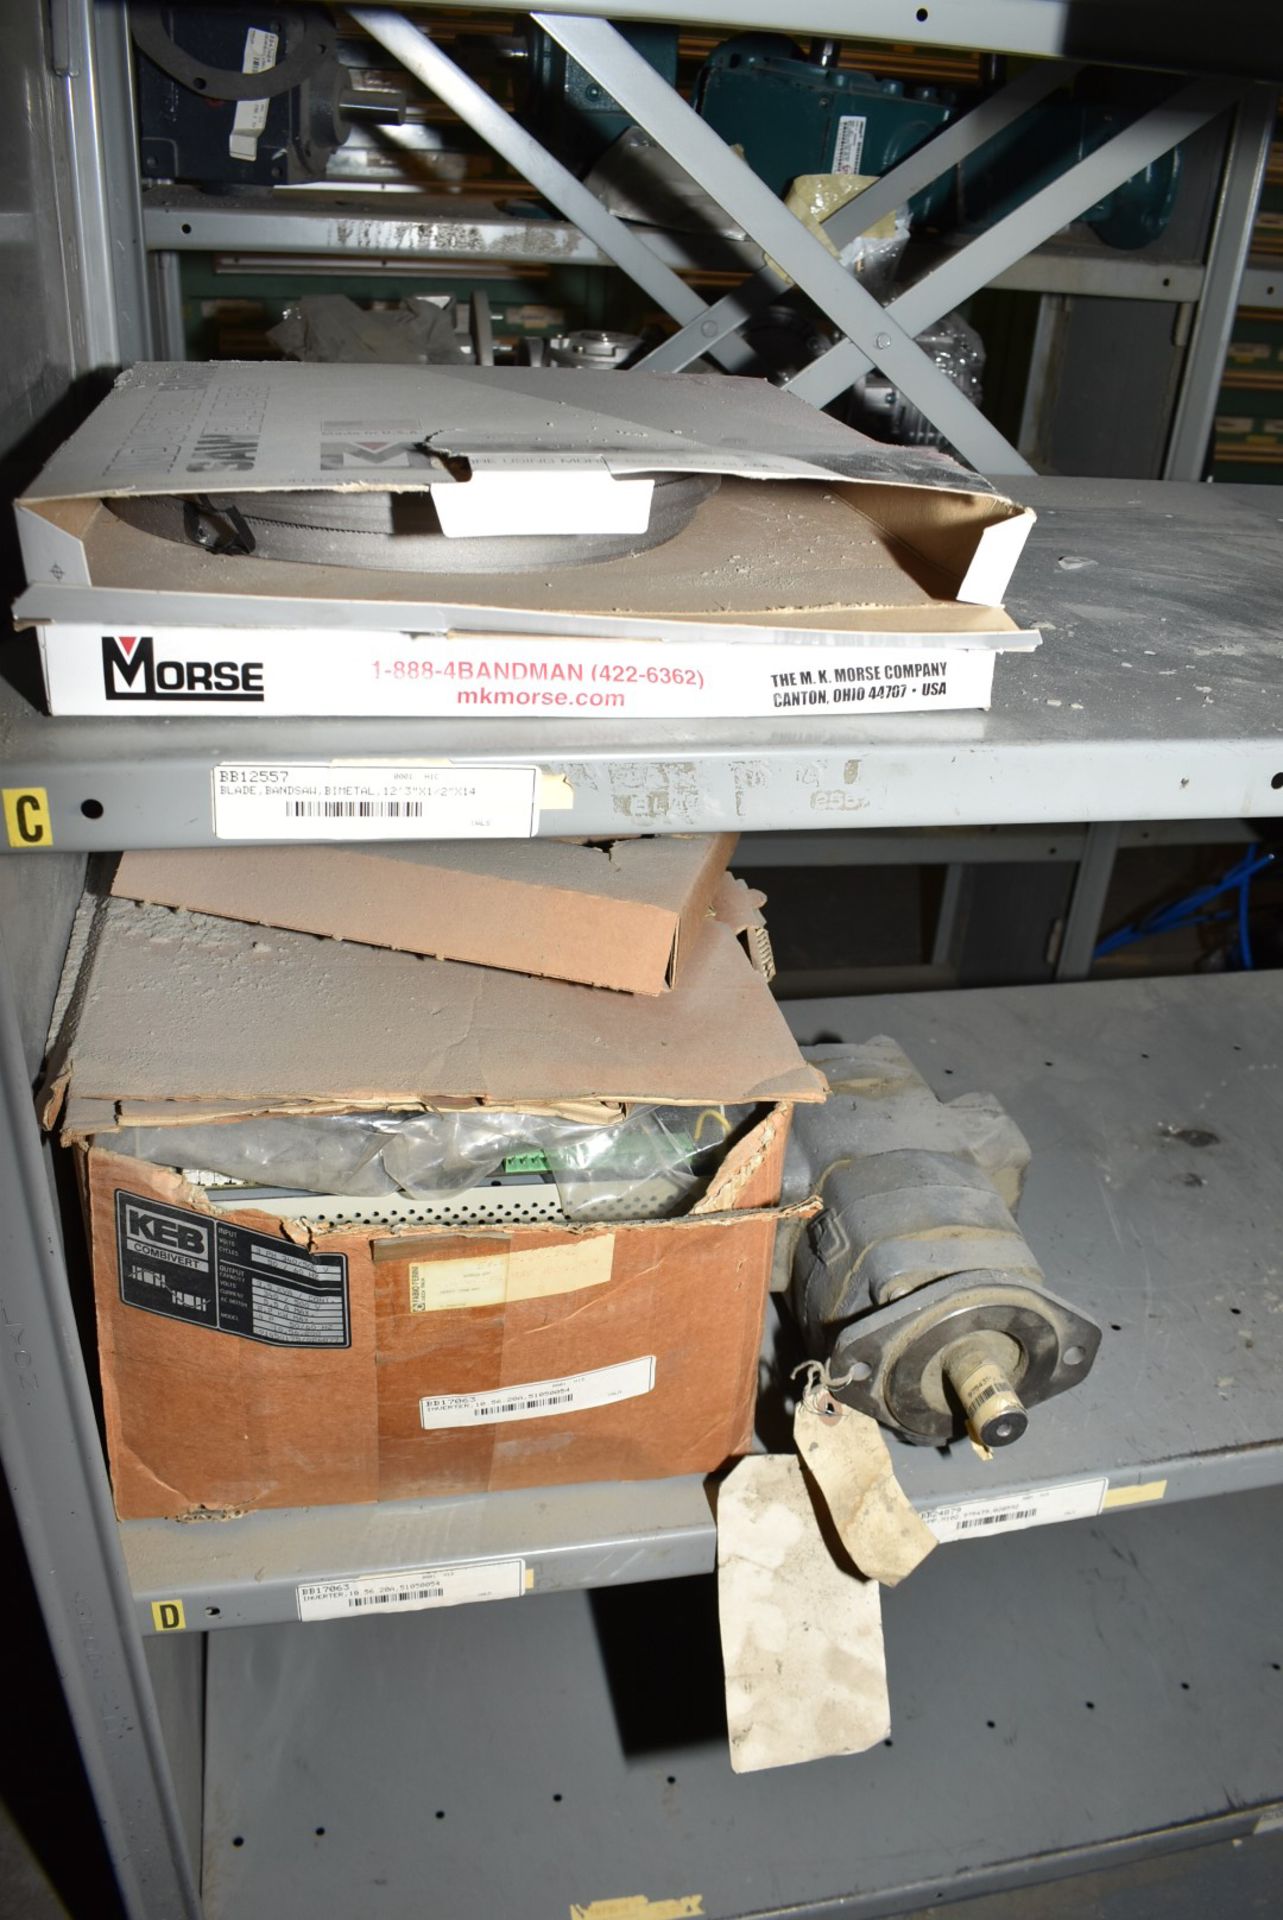 LOT/ CONTENTS OF SHELF - INCLUDING STORAGE BOX WITH SPRINGS, PVC HOSE, BAND SAW BLADES, INVERTER [ - Image 5 of 5